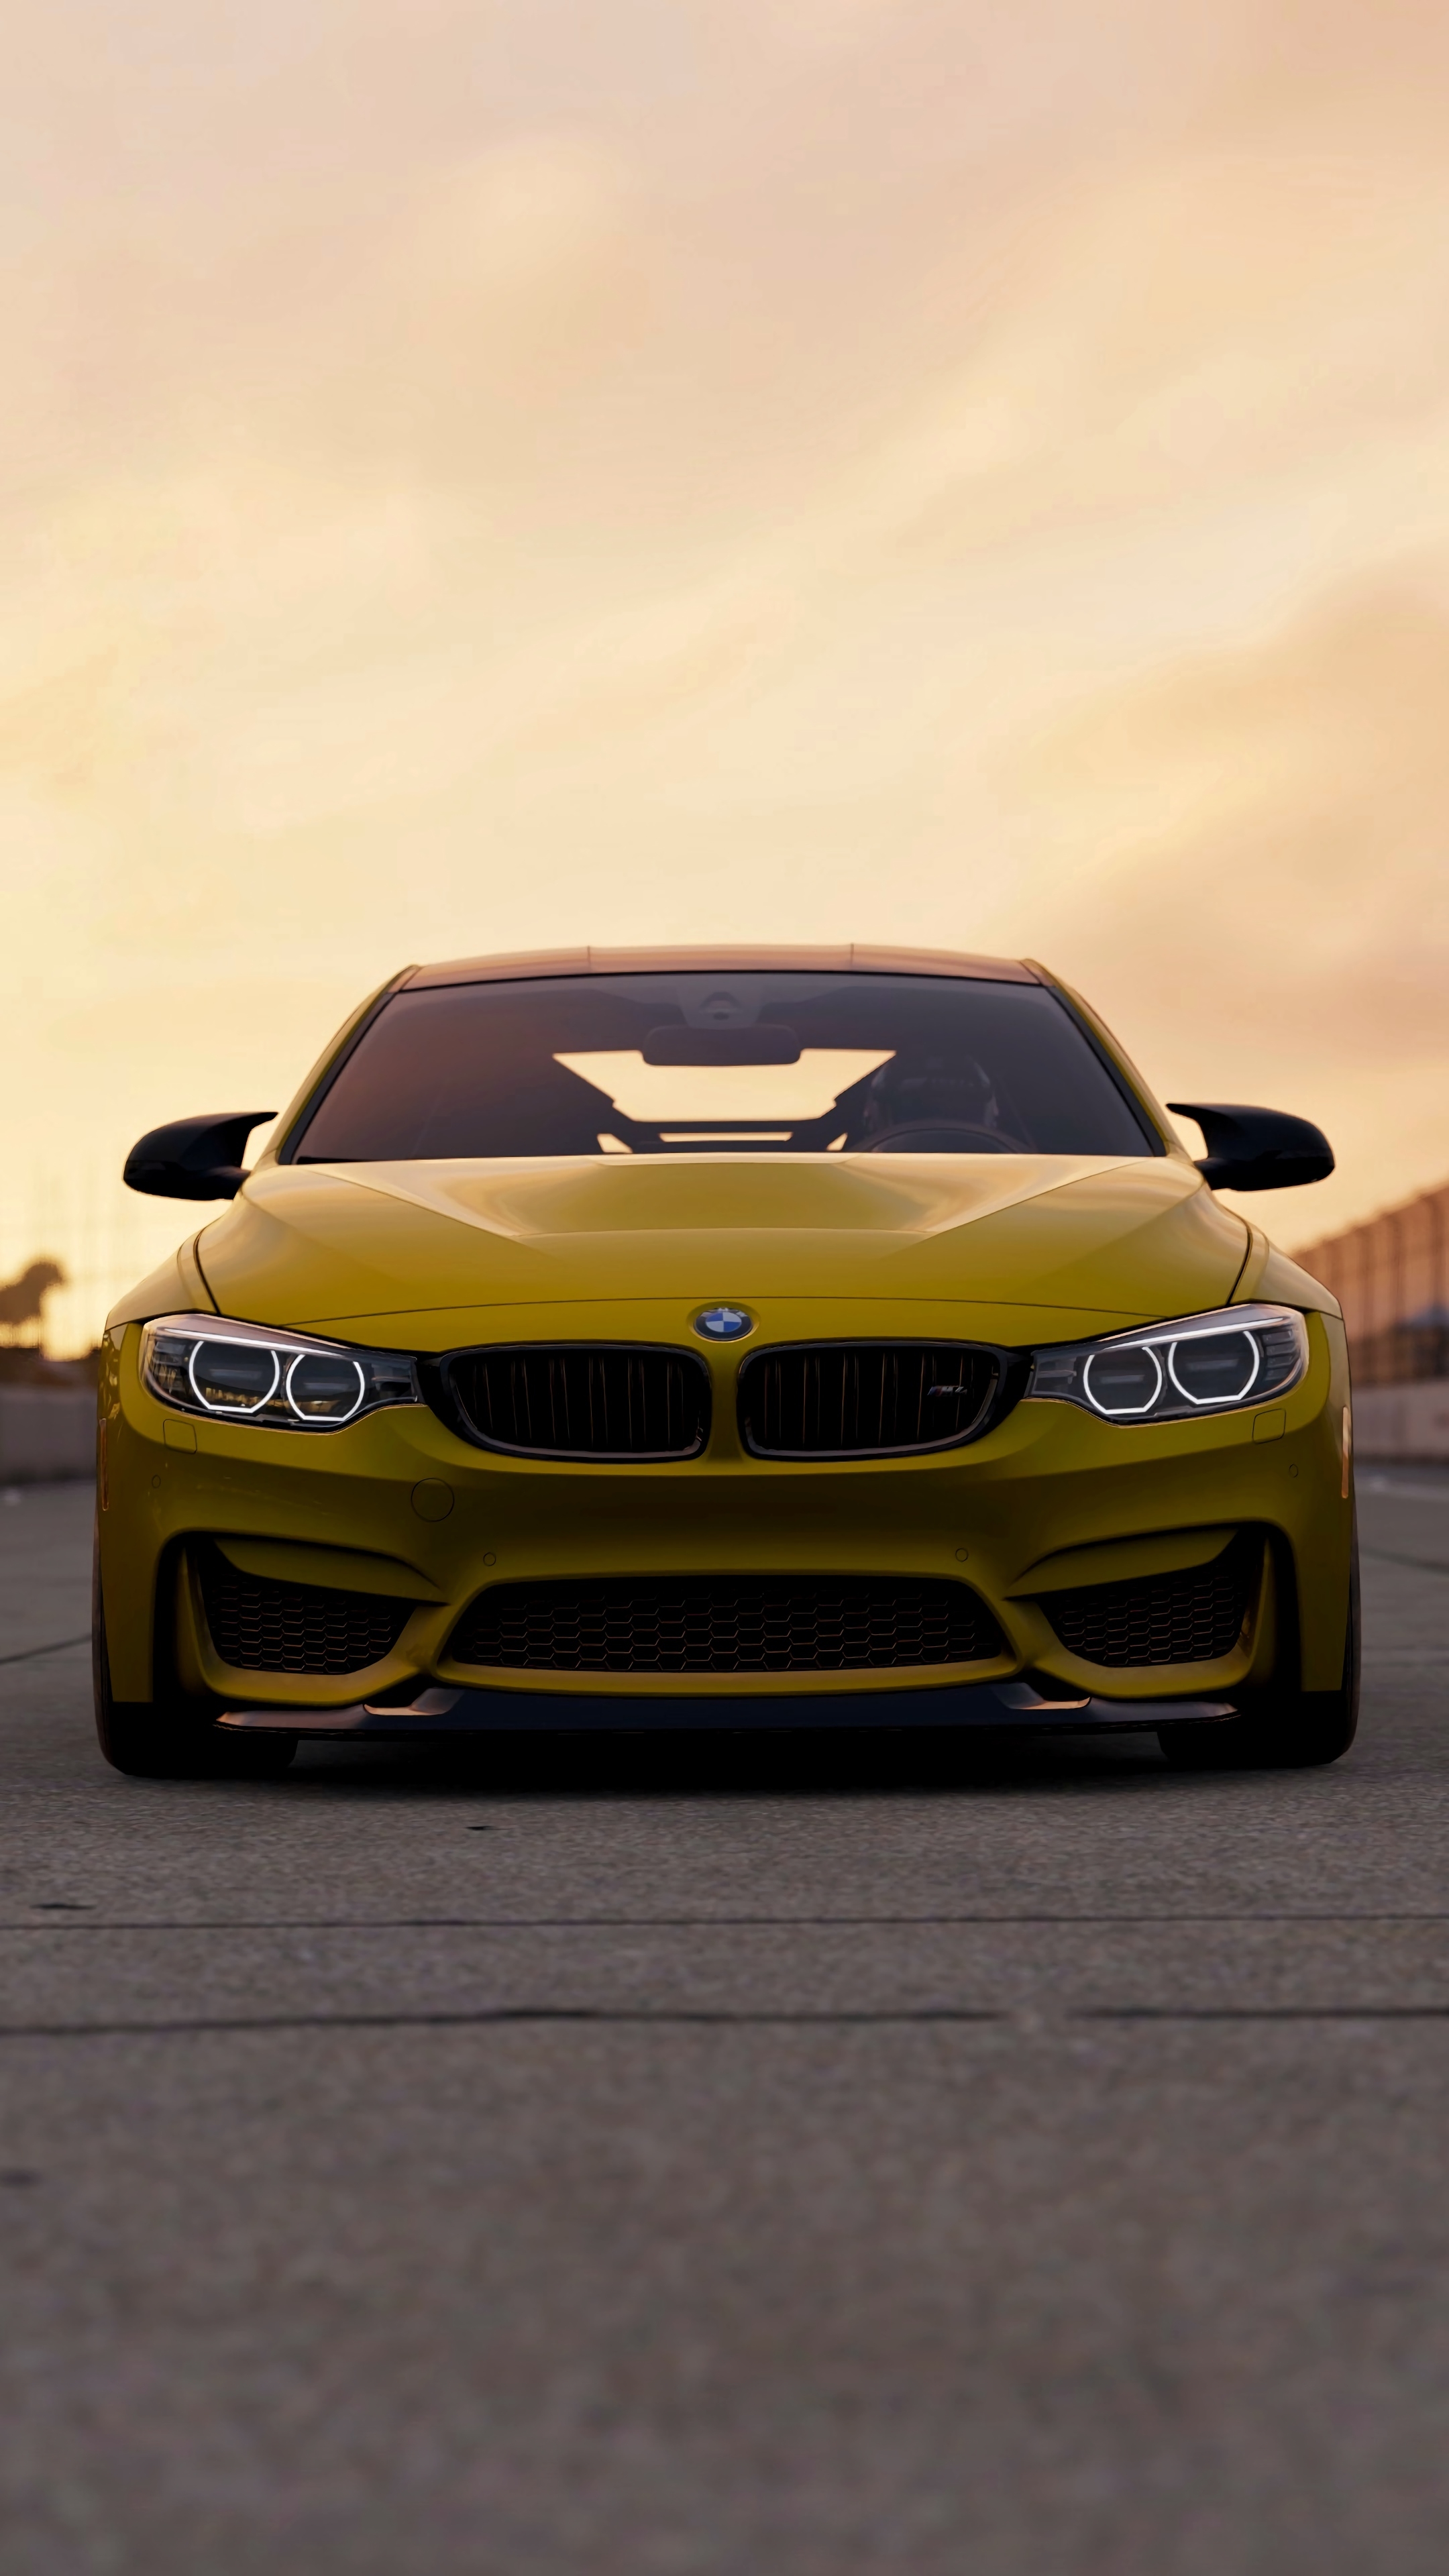 Wallpapers BMW M3 yellow front view on the desktop